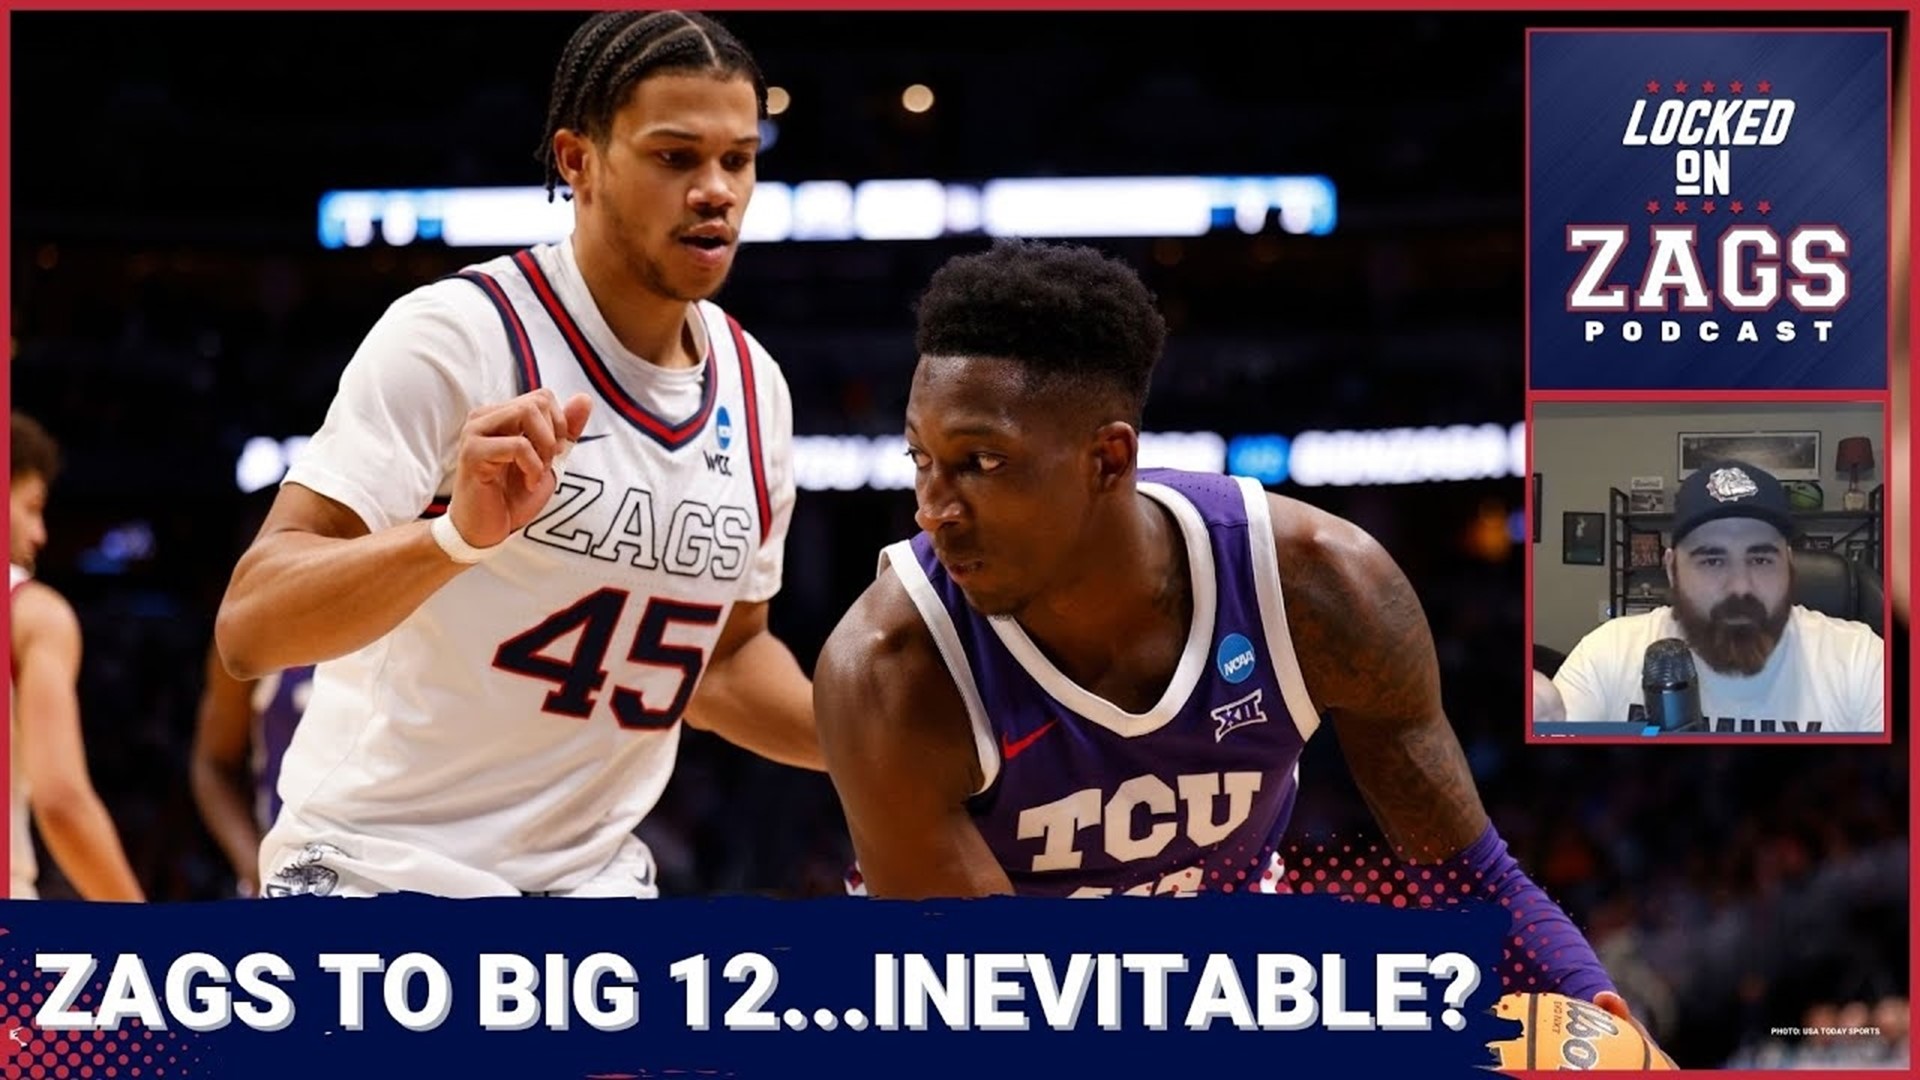 Tons of people witnessed the Gonzaga Bulldogs beat Big 12 conference opponent TCU on Sunday, while multiple commercials also had Gonzaga's brand at the forefront.